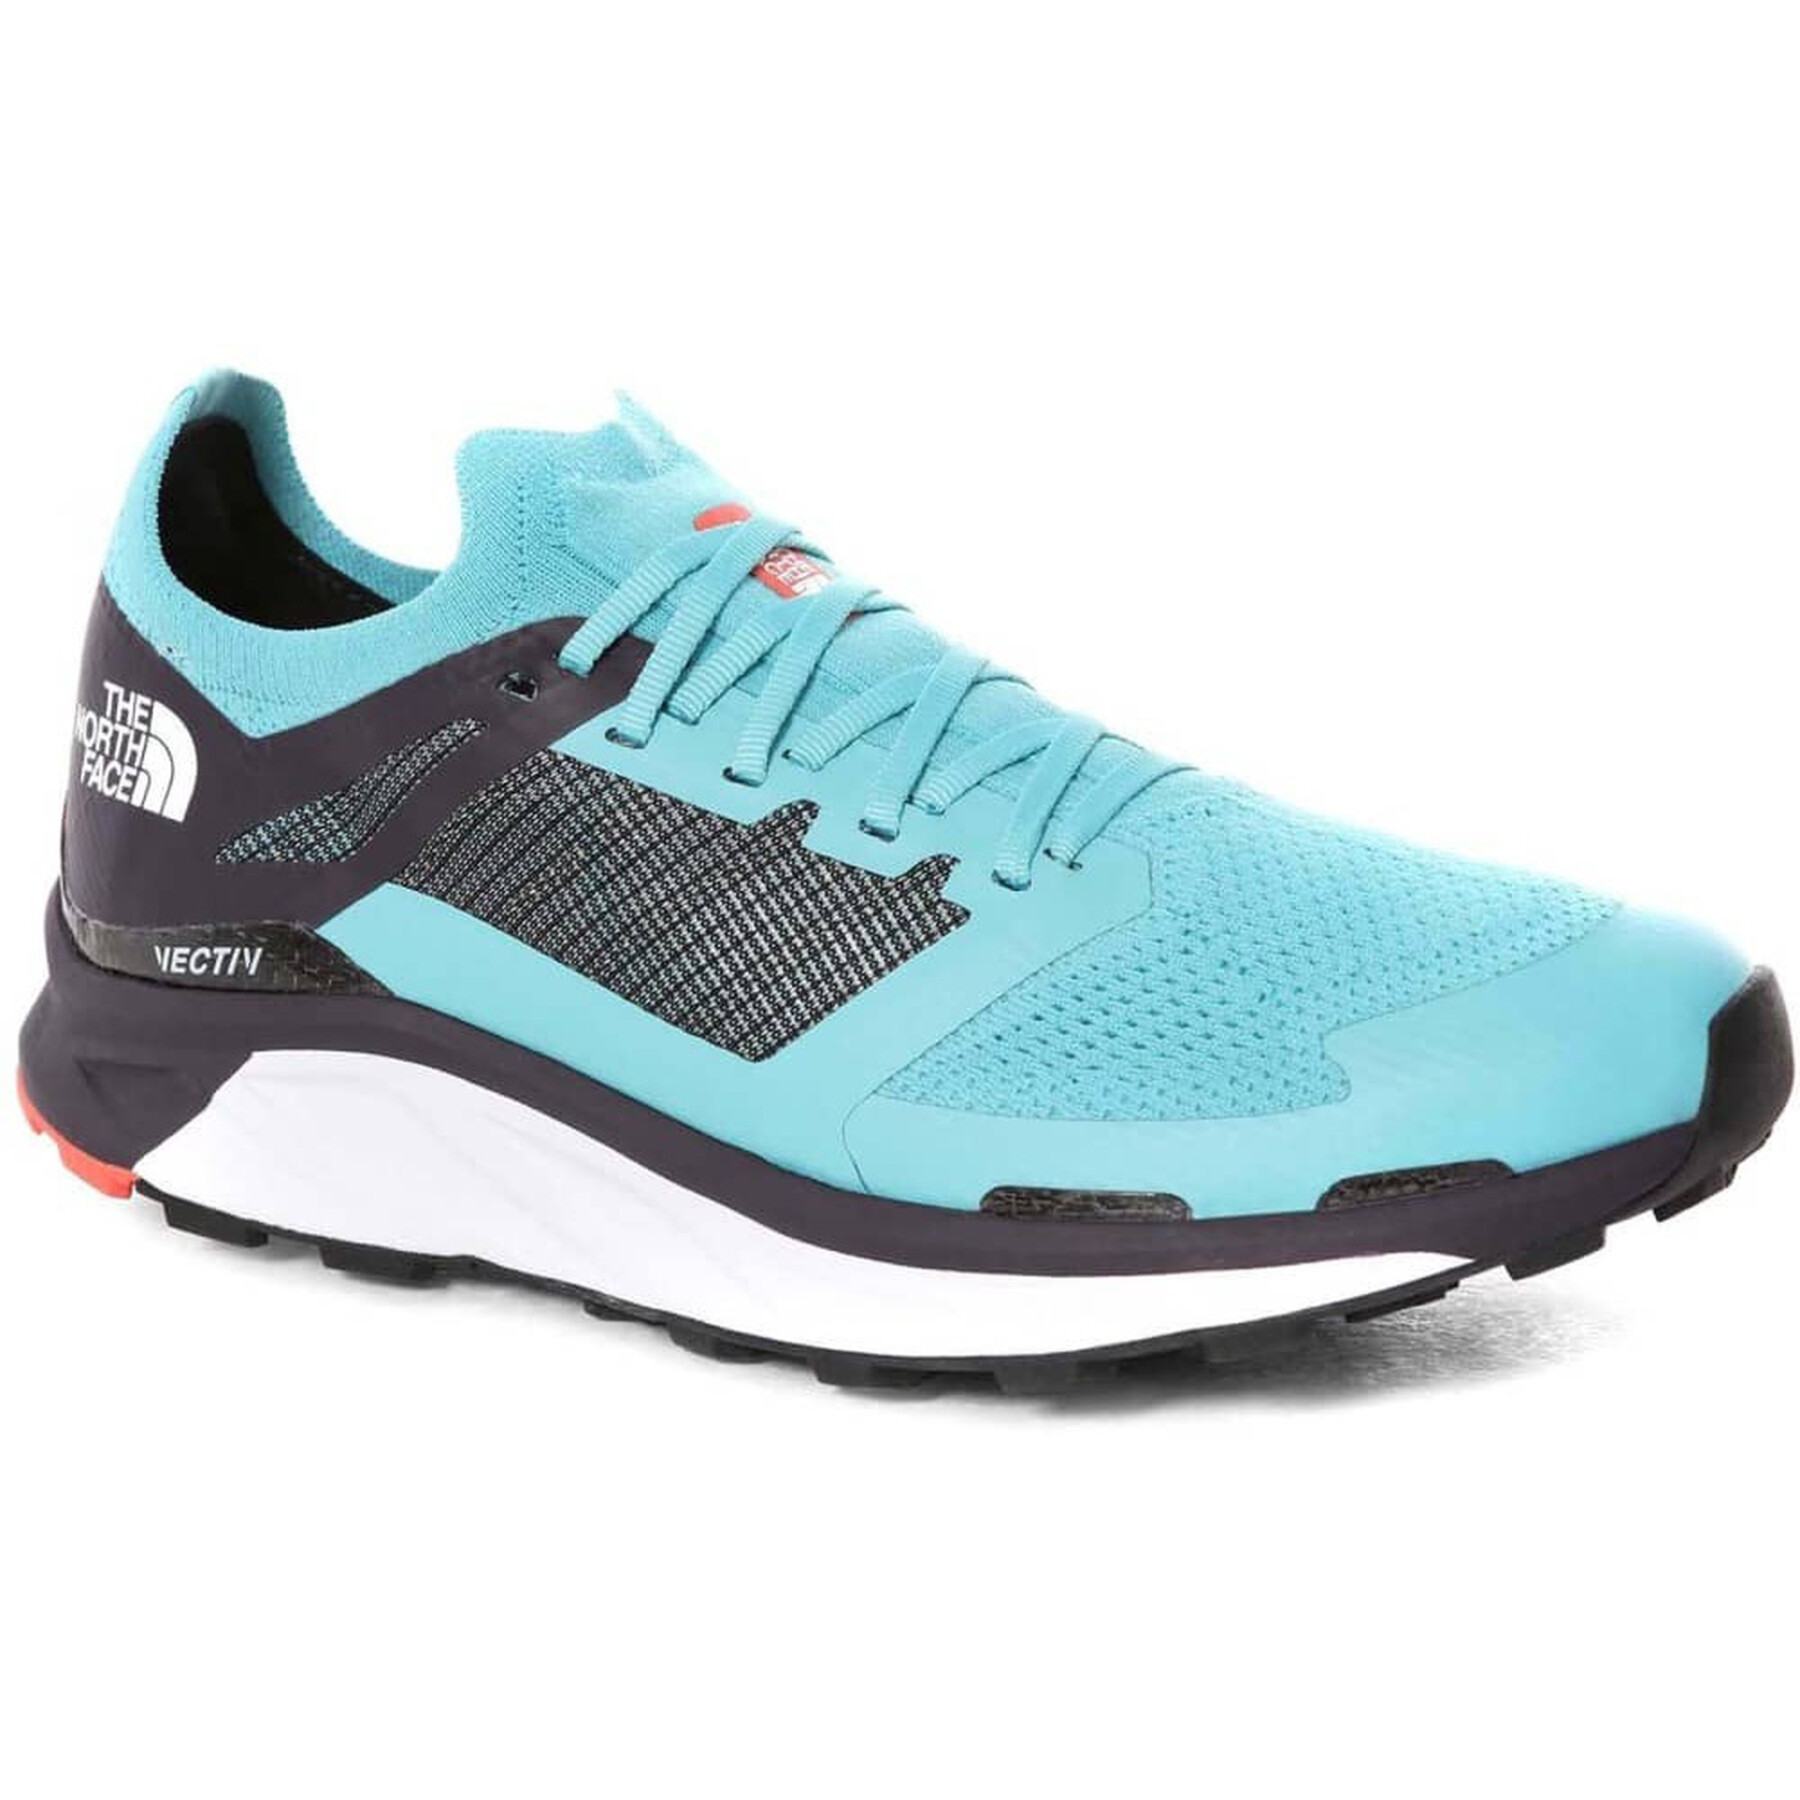 Women's Trail running shoes The North Face Flight Vectiv